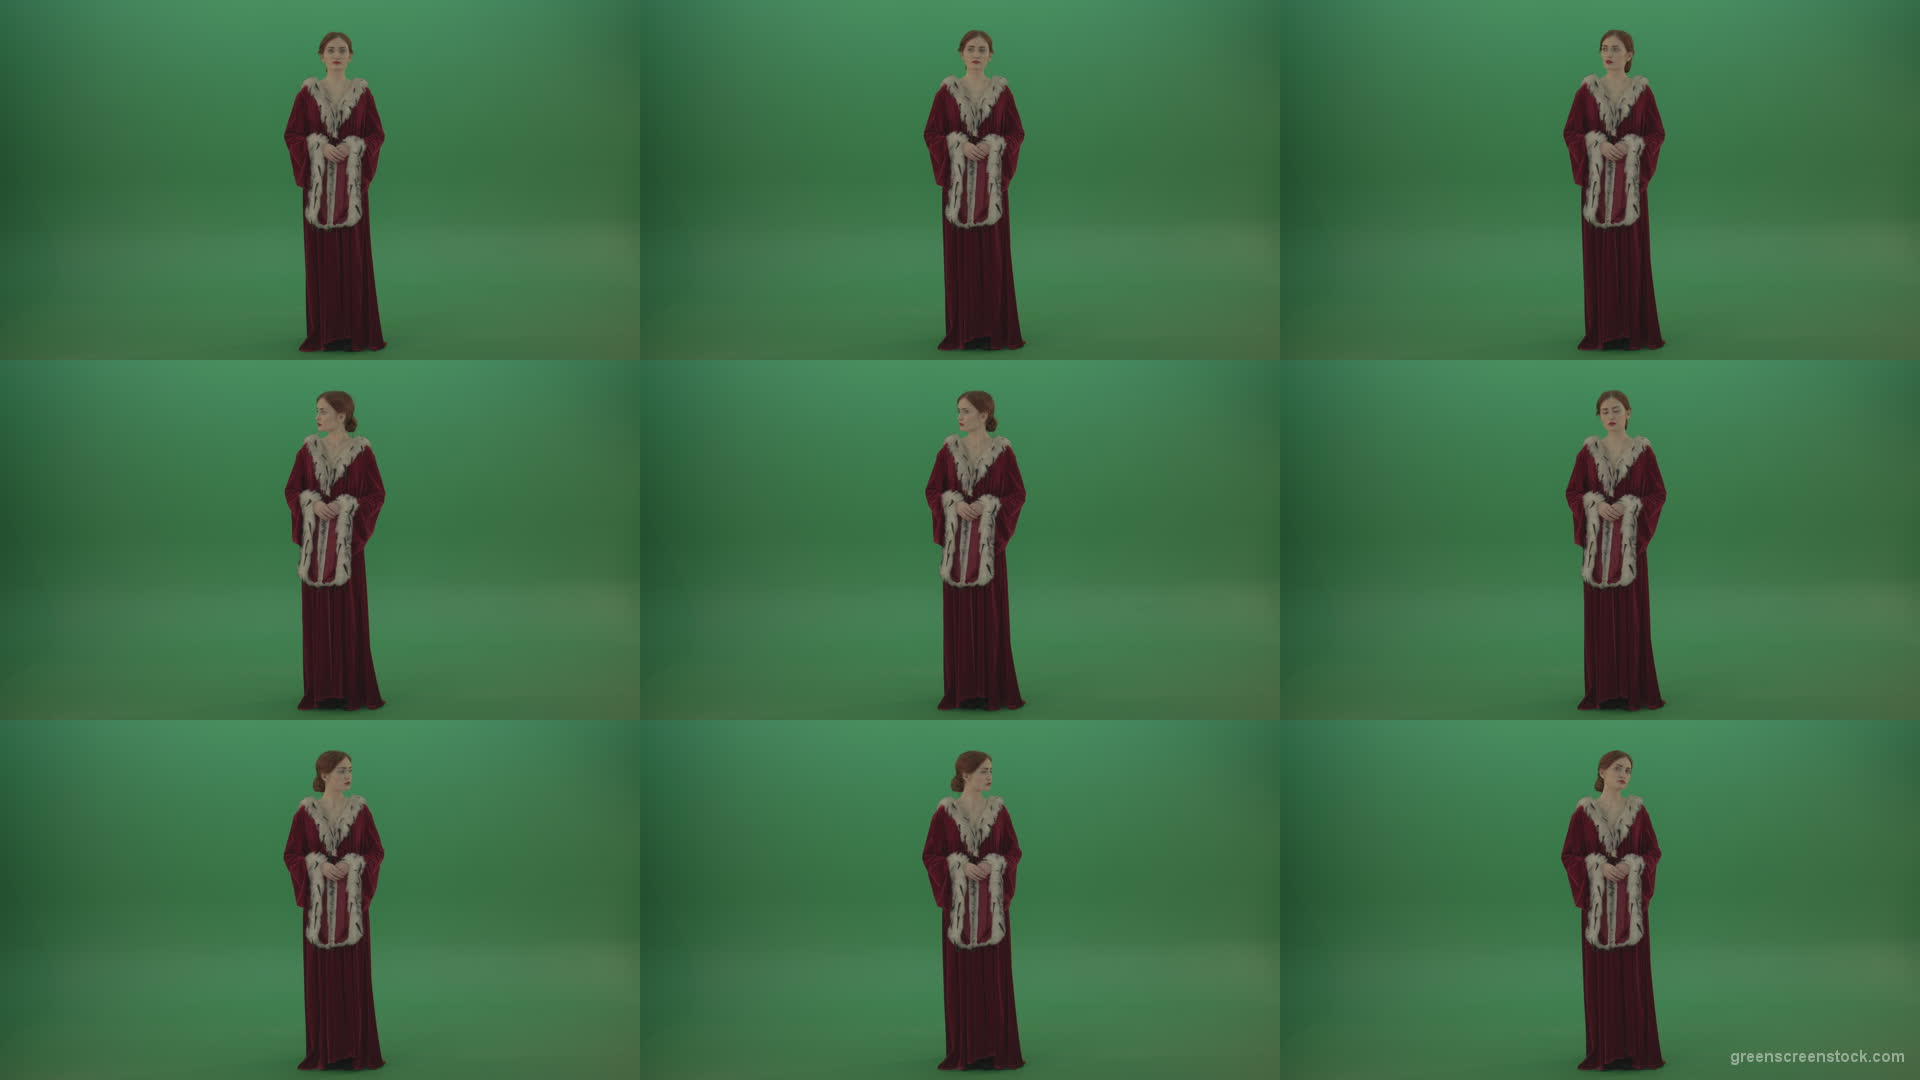 Princess-thinks-and-elegantly-gracefully-turns-her-head-in-different-directions Green Screen Stock